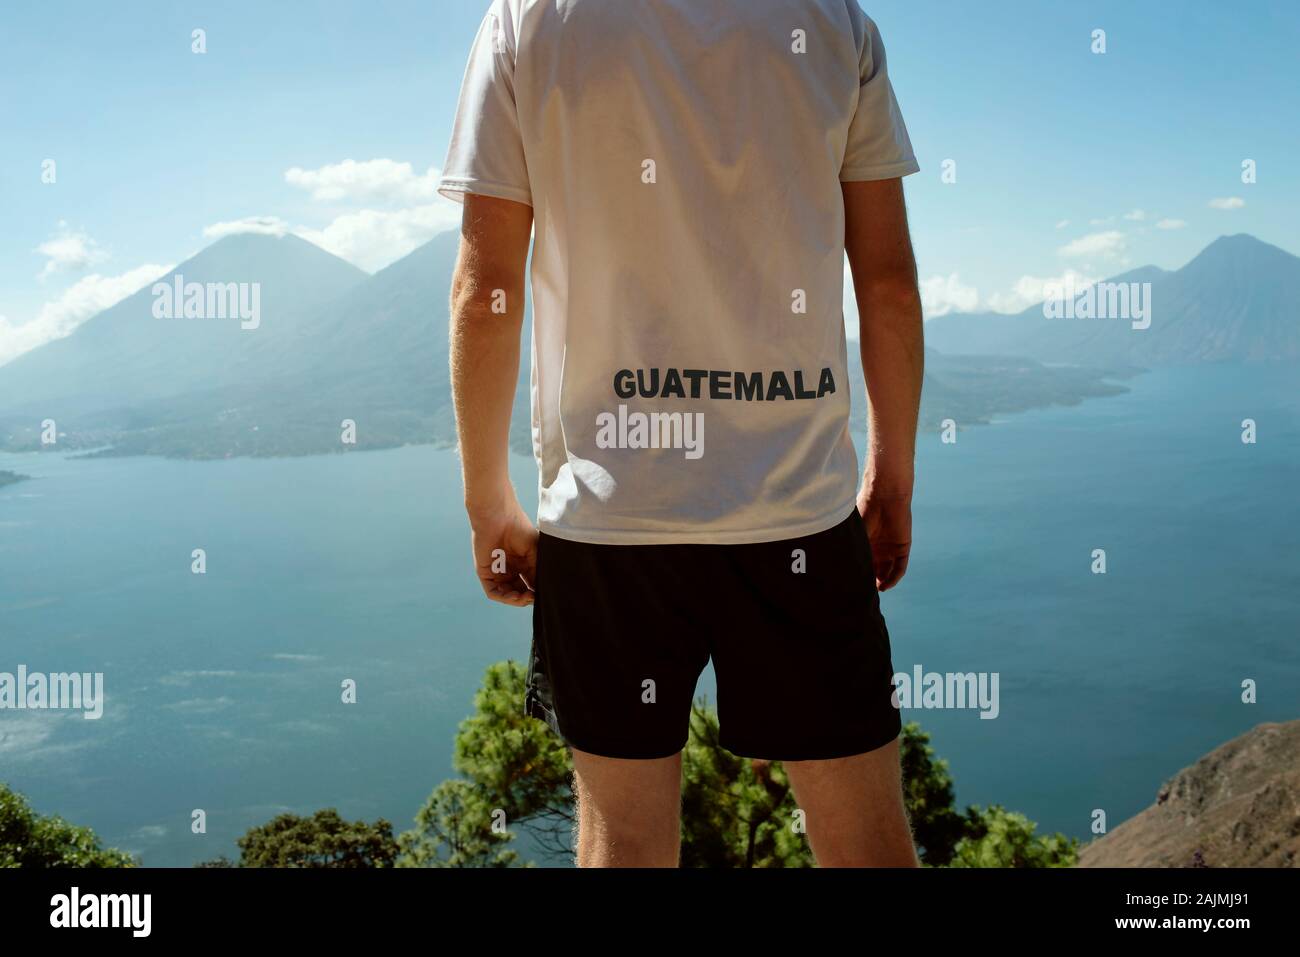 Tourist from behind looking at the scenic views of Lake Atitlán, Guatemala. Touristic / country promotion, travel lifestyle photo. Dec 2018 Stock Photo